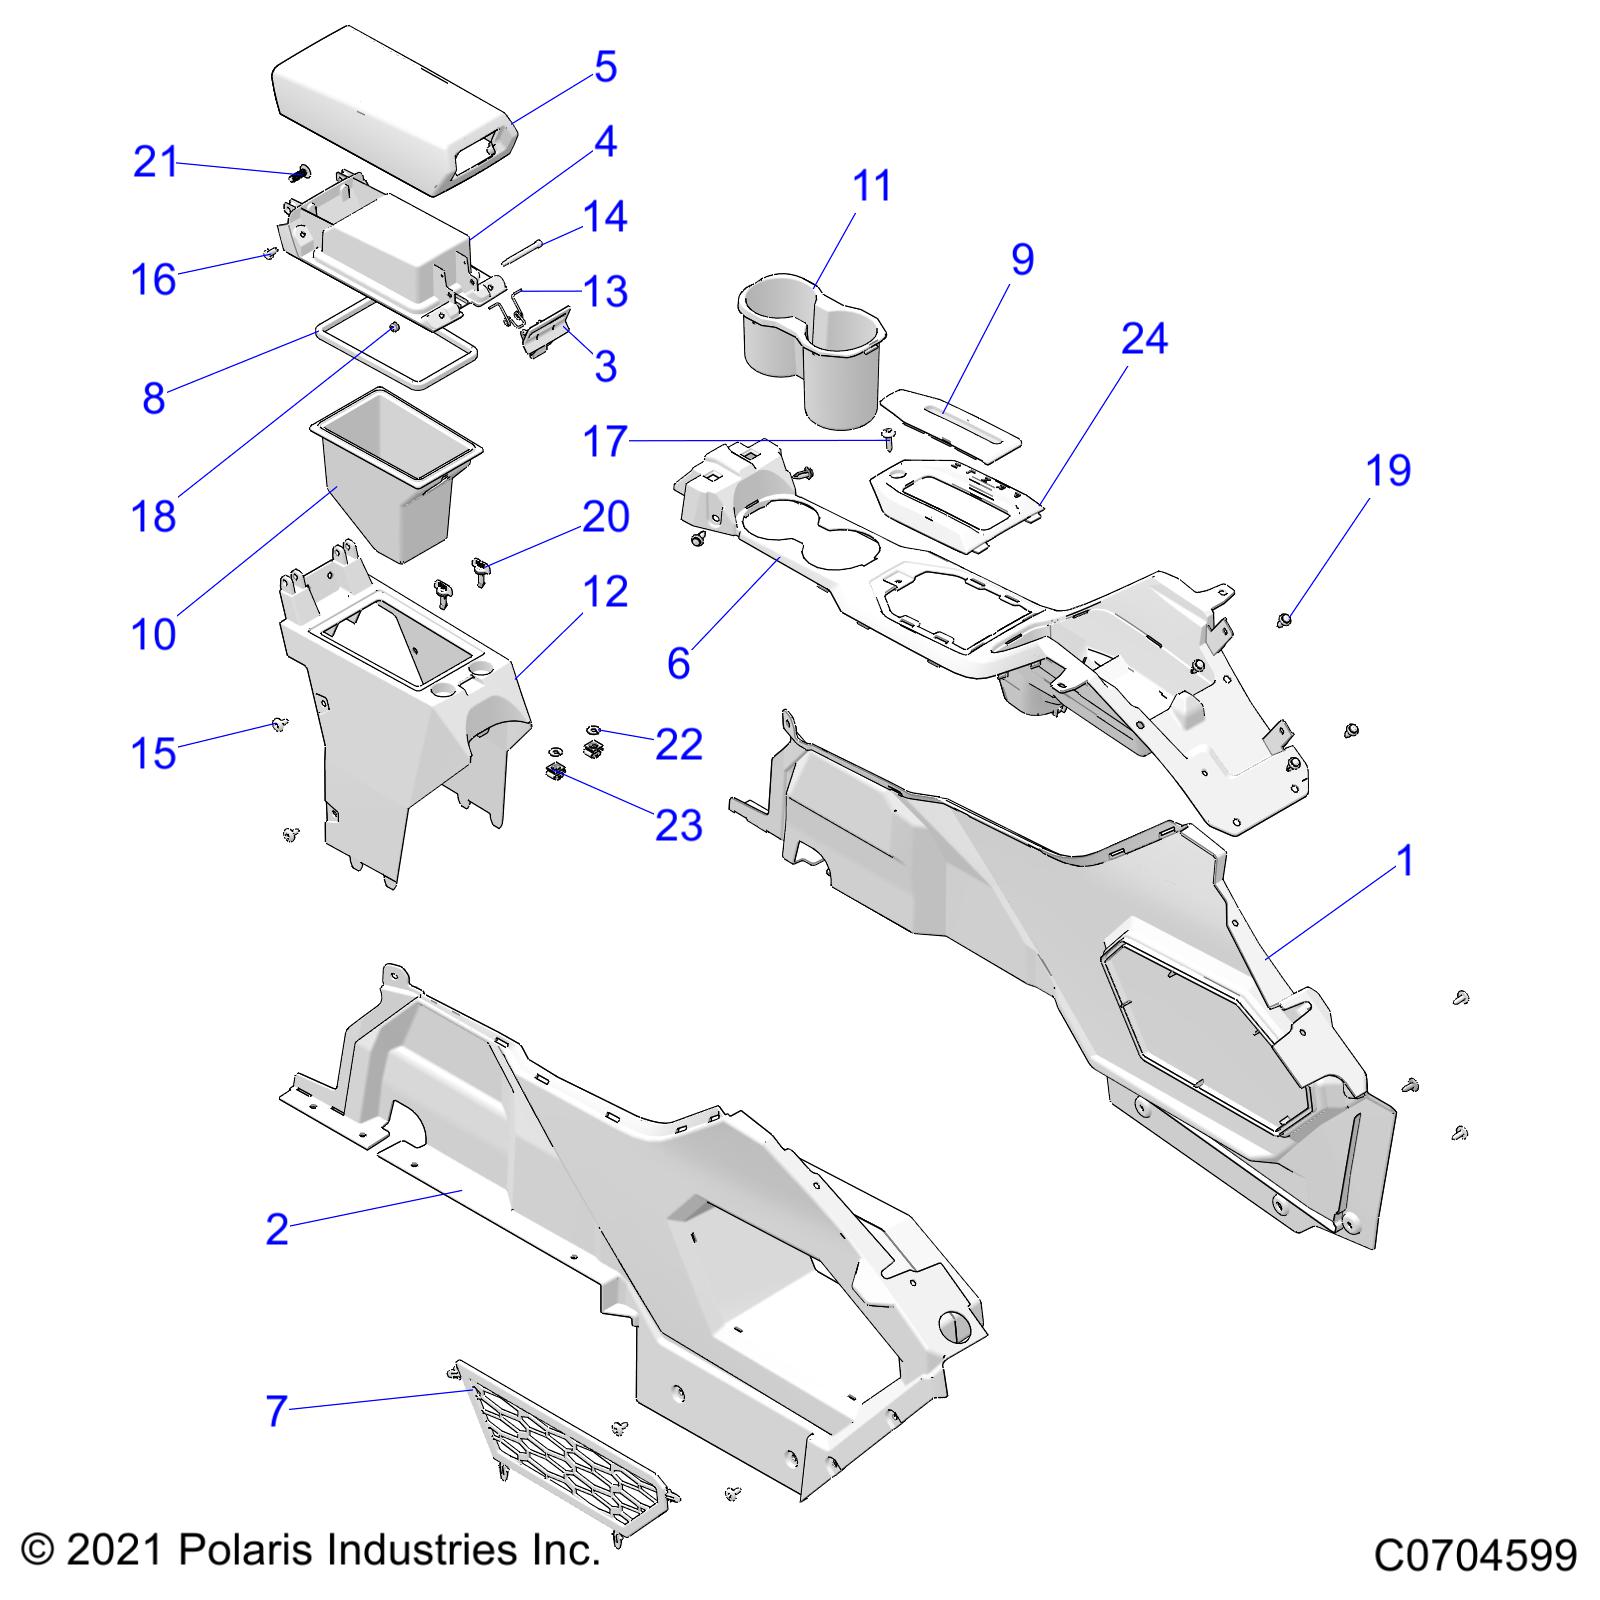 Part Number : 5417298 PAD-SHIFTER